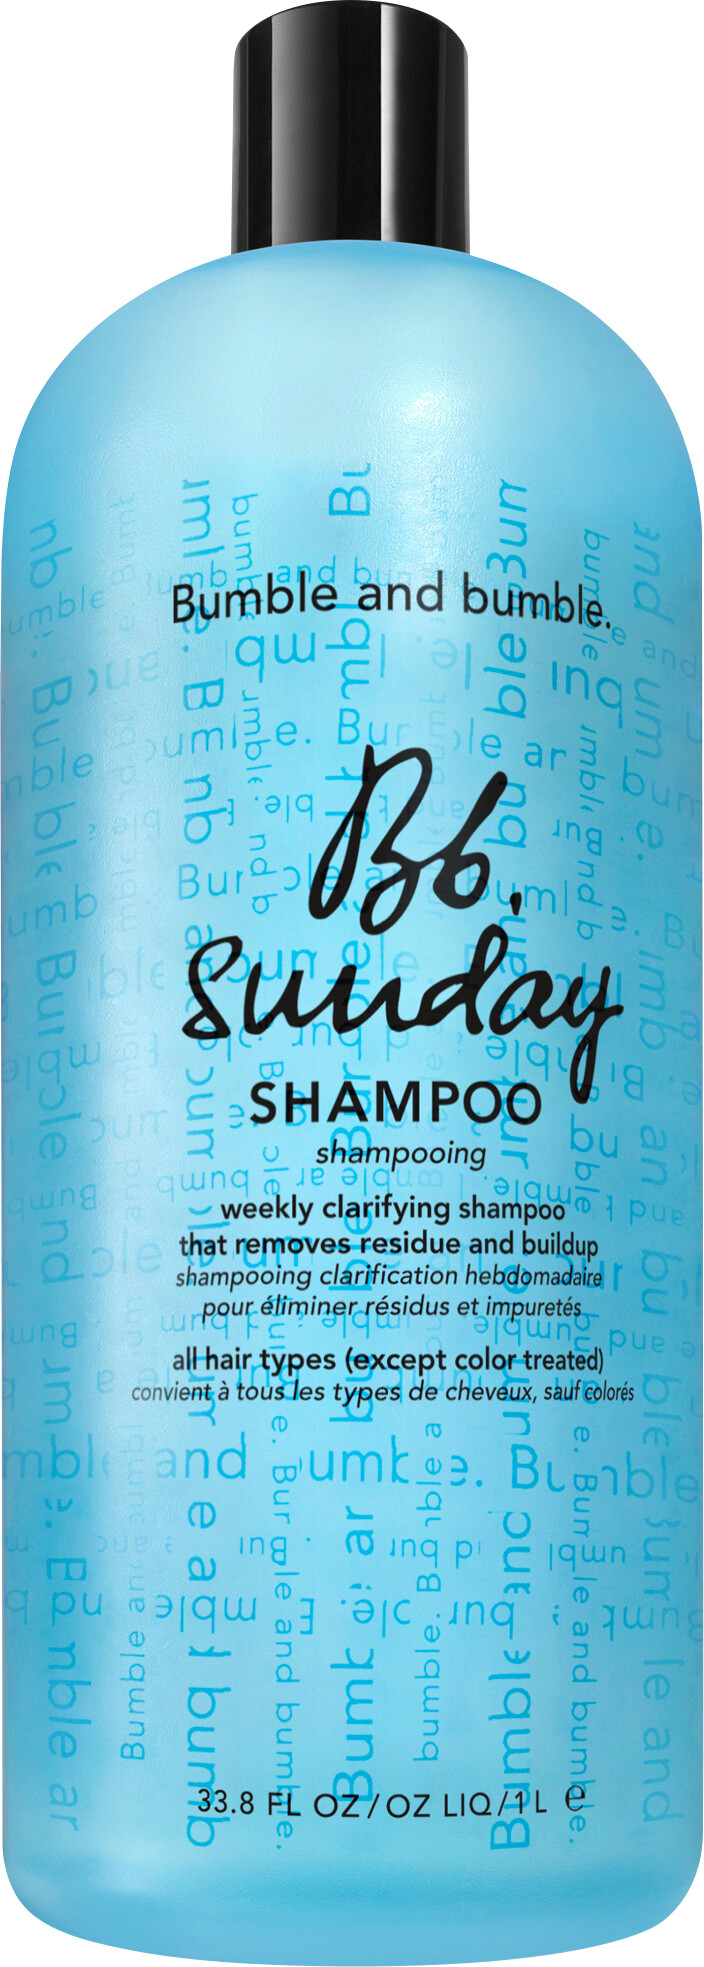 Bumble and bumble Sunday Shampoo 1 litre